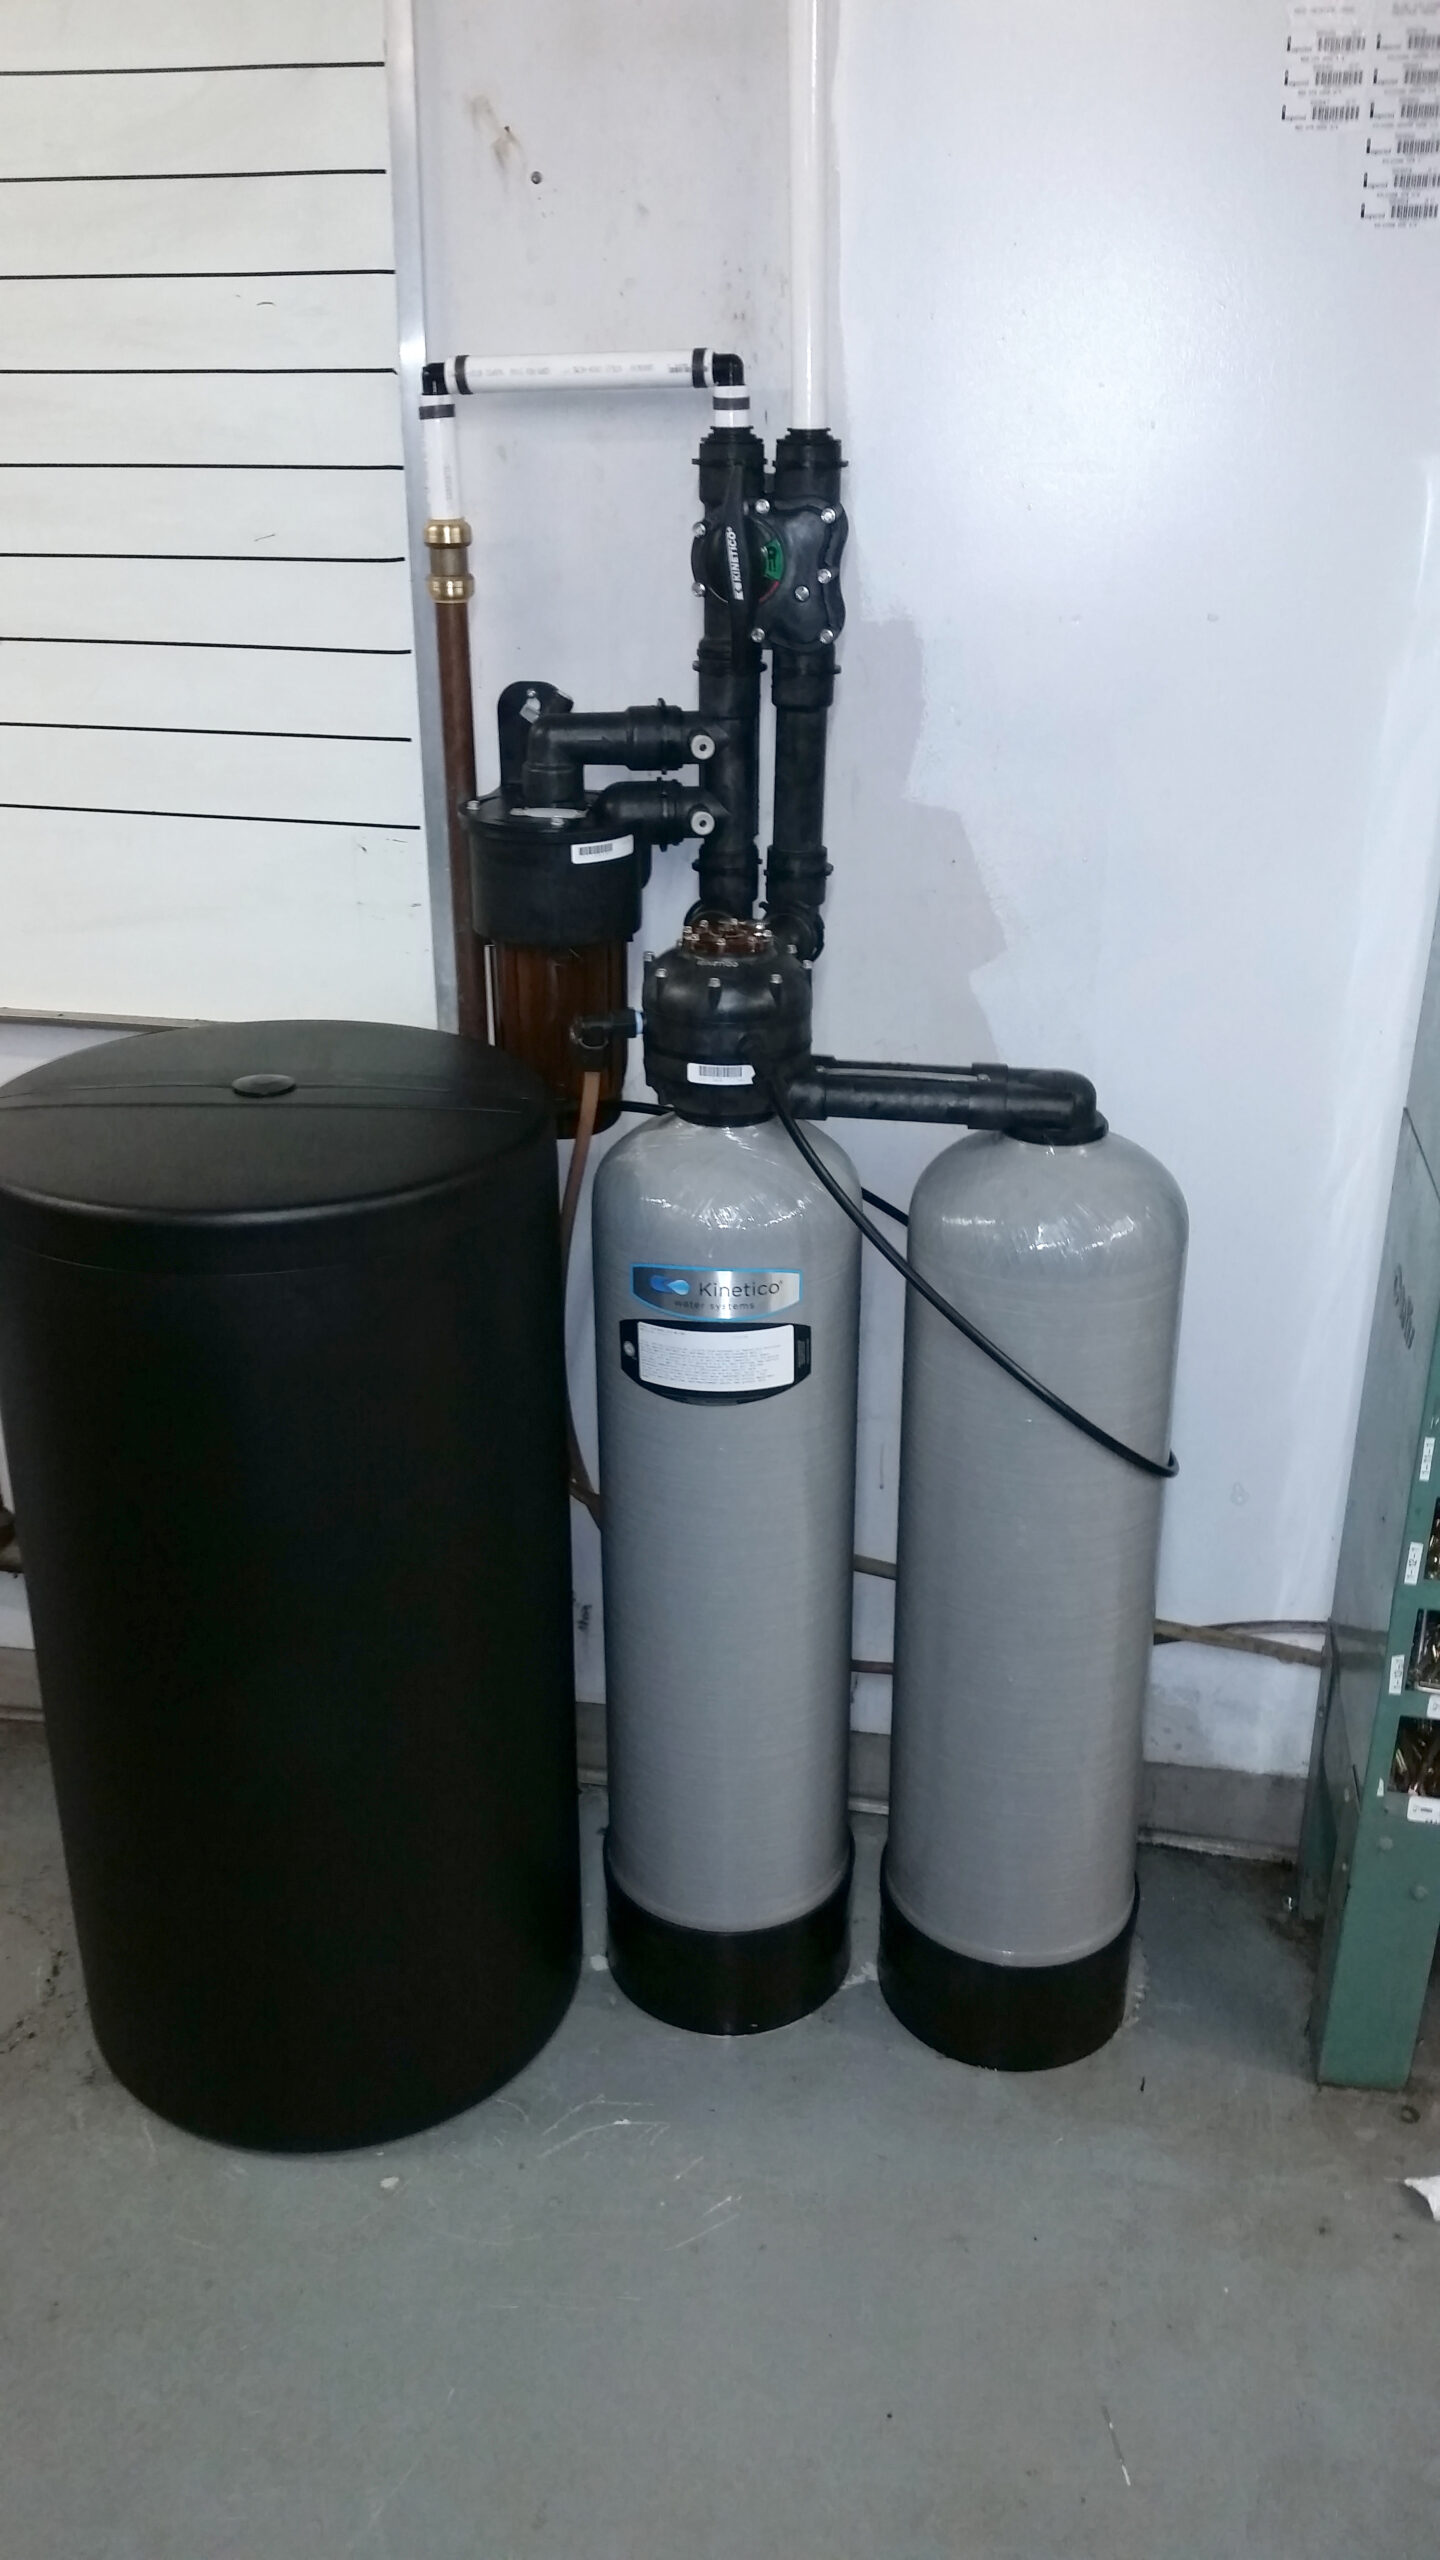 A new Kinetico water softener is installed at Decker Truck Line, Inc. in Davenport, Iowa